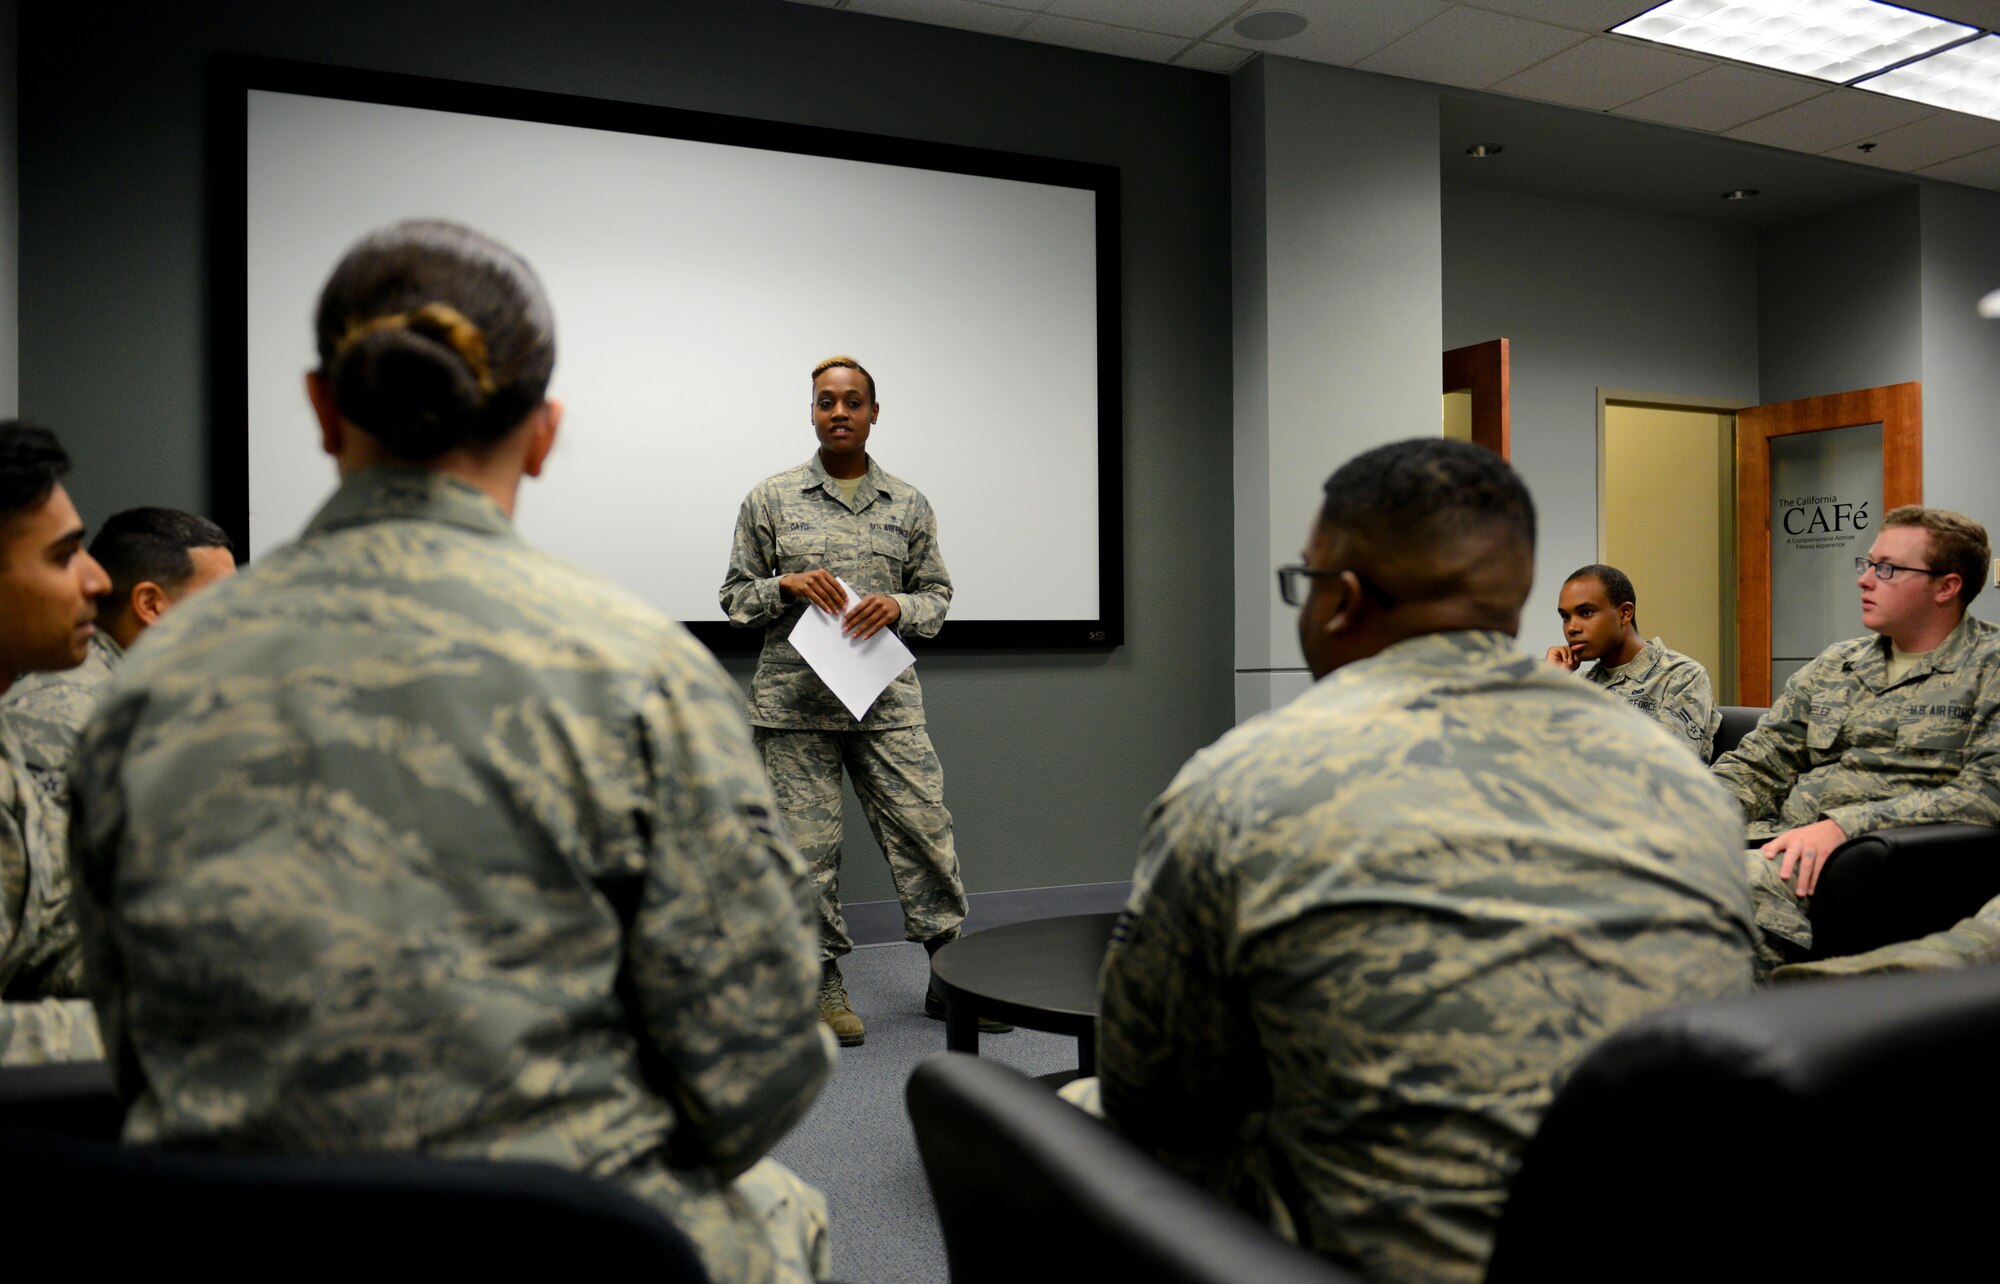 Senior Airman Ashley Davis, 9th Aerospace Medicine Squadron bioenvironmental technician speaks at a meeting for the organization A.C.E or “Airman Committed to Excellence” at Beale AFB, California May 31, 2017. The purpose of ACE is to bring together Airmen from across the base to network both professionally and socially with the goal of building better bonds as Wingmen. (U.S. Air Force photo/Staff Sgt. Jeffrey Schultze)